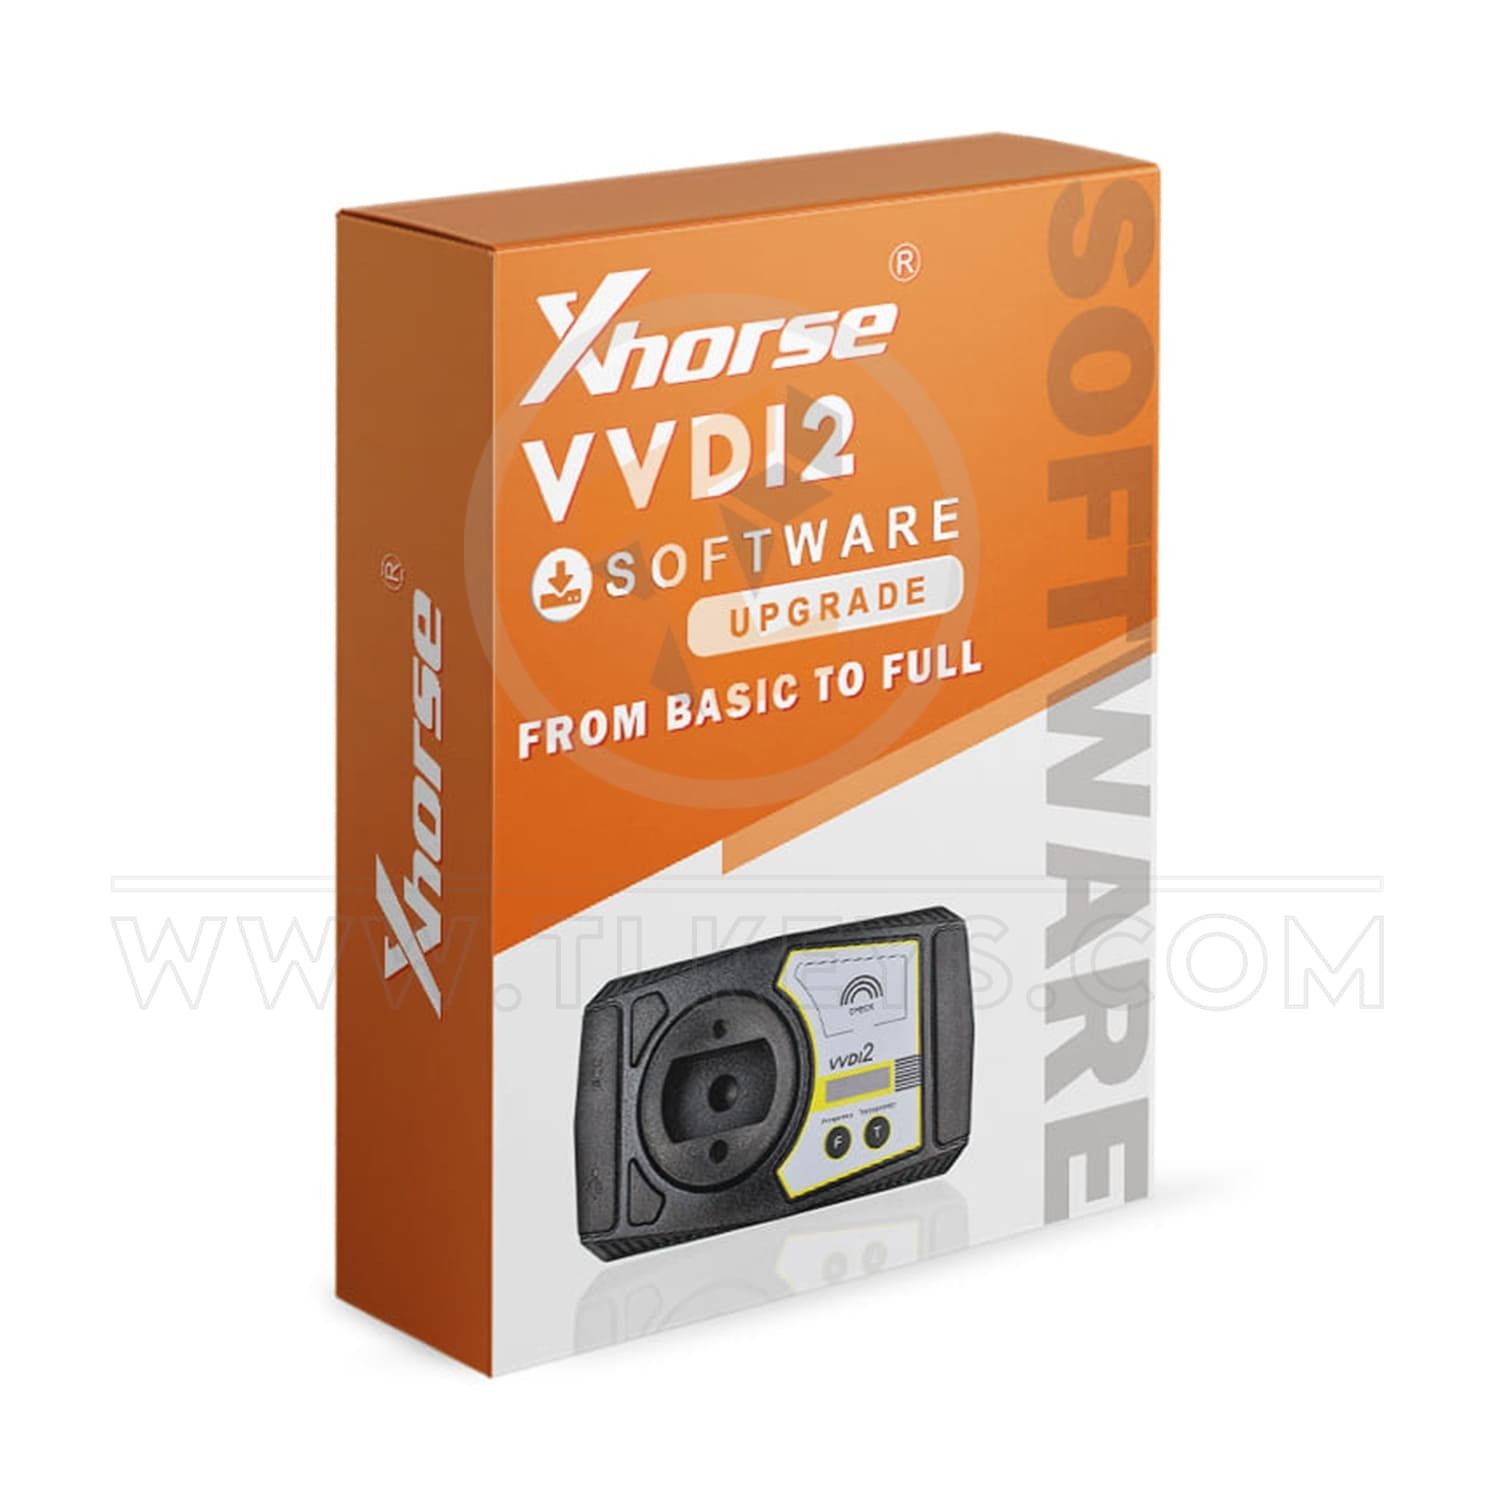 VVDI2 Software Upgrade From Basic To Full software